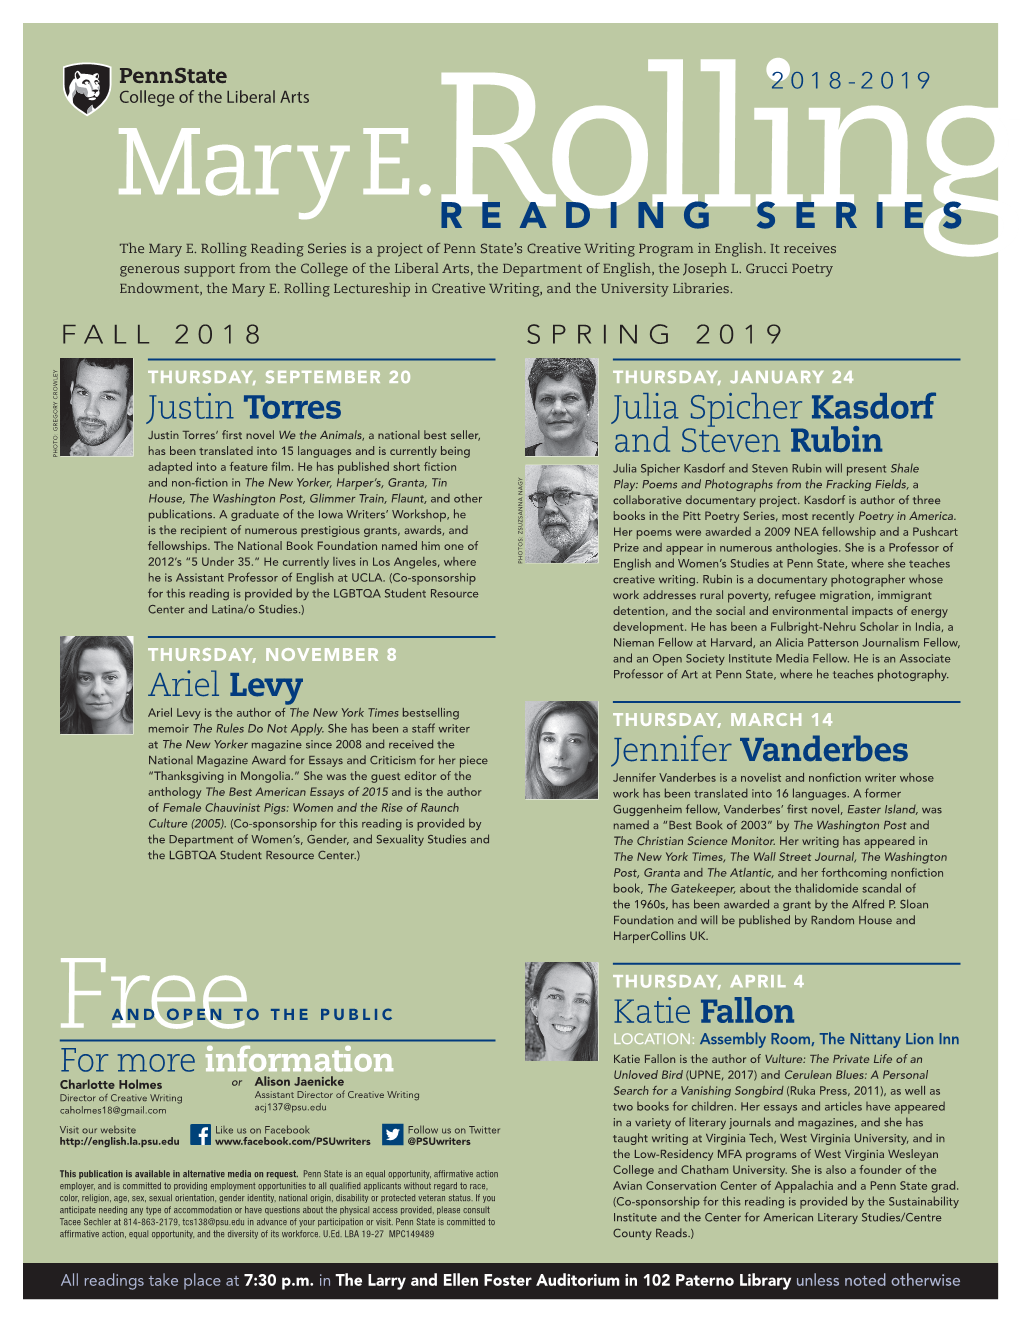 Mary E. Rolling Reading Series Is a Project Ofrolling Penn State’S Creative Writing Program in English